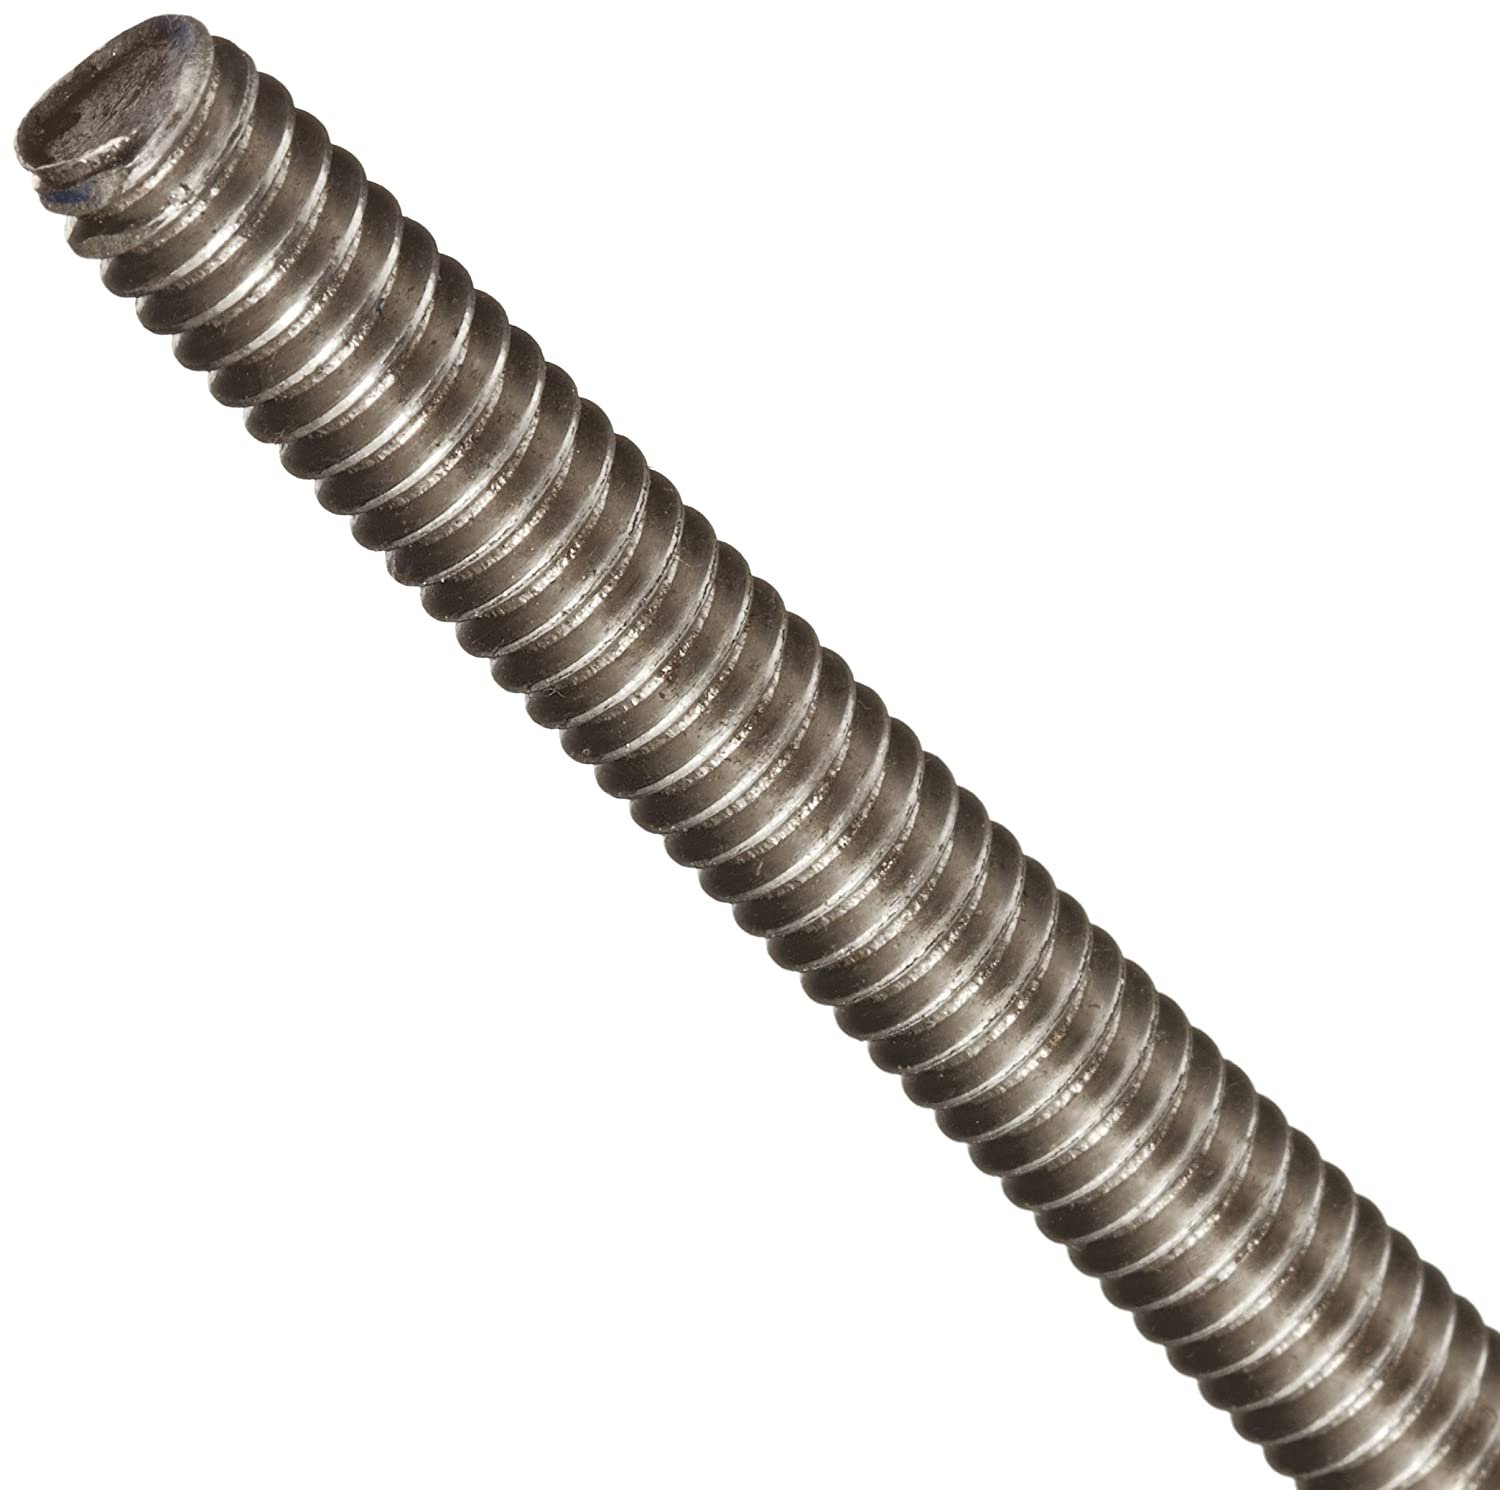 Stainless Steel Thread Rod Manufacturers In Delhi, Ludhiana India